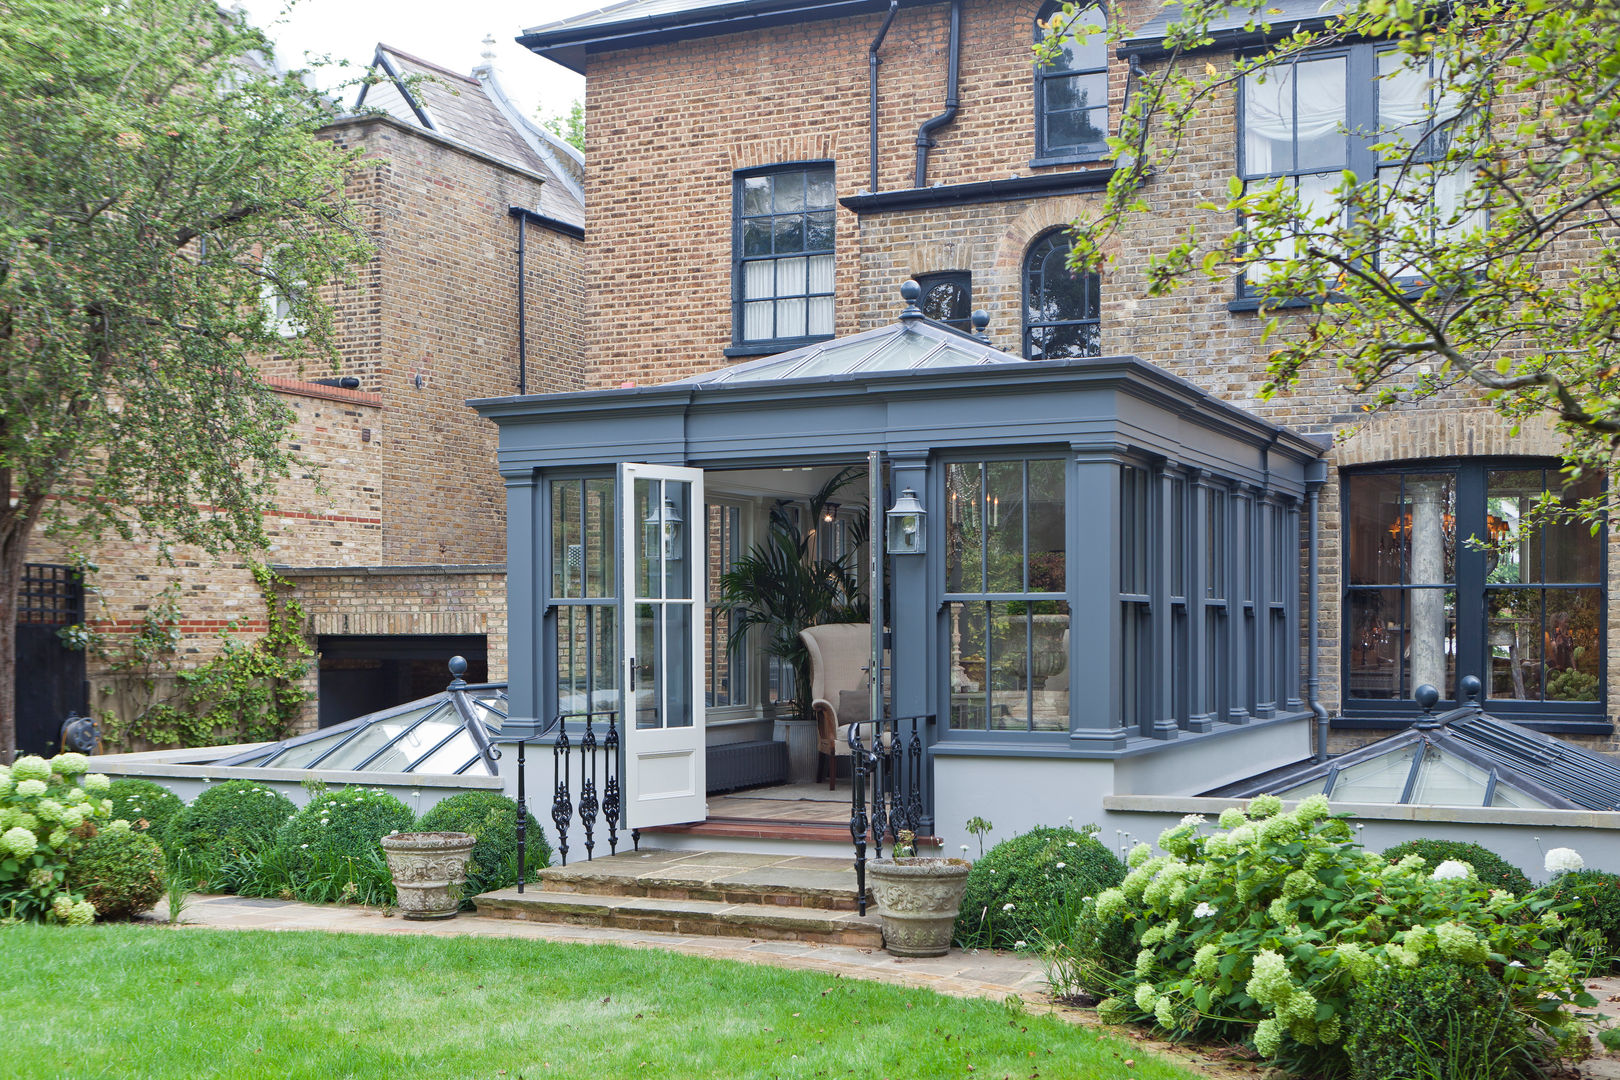 Dual Level Orangery and Rooflights Transform a London Townhouse Vale Garden Houses Conservatory